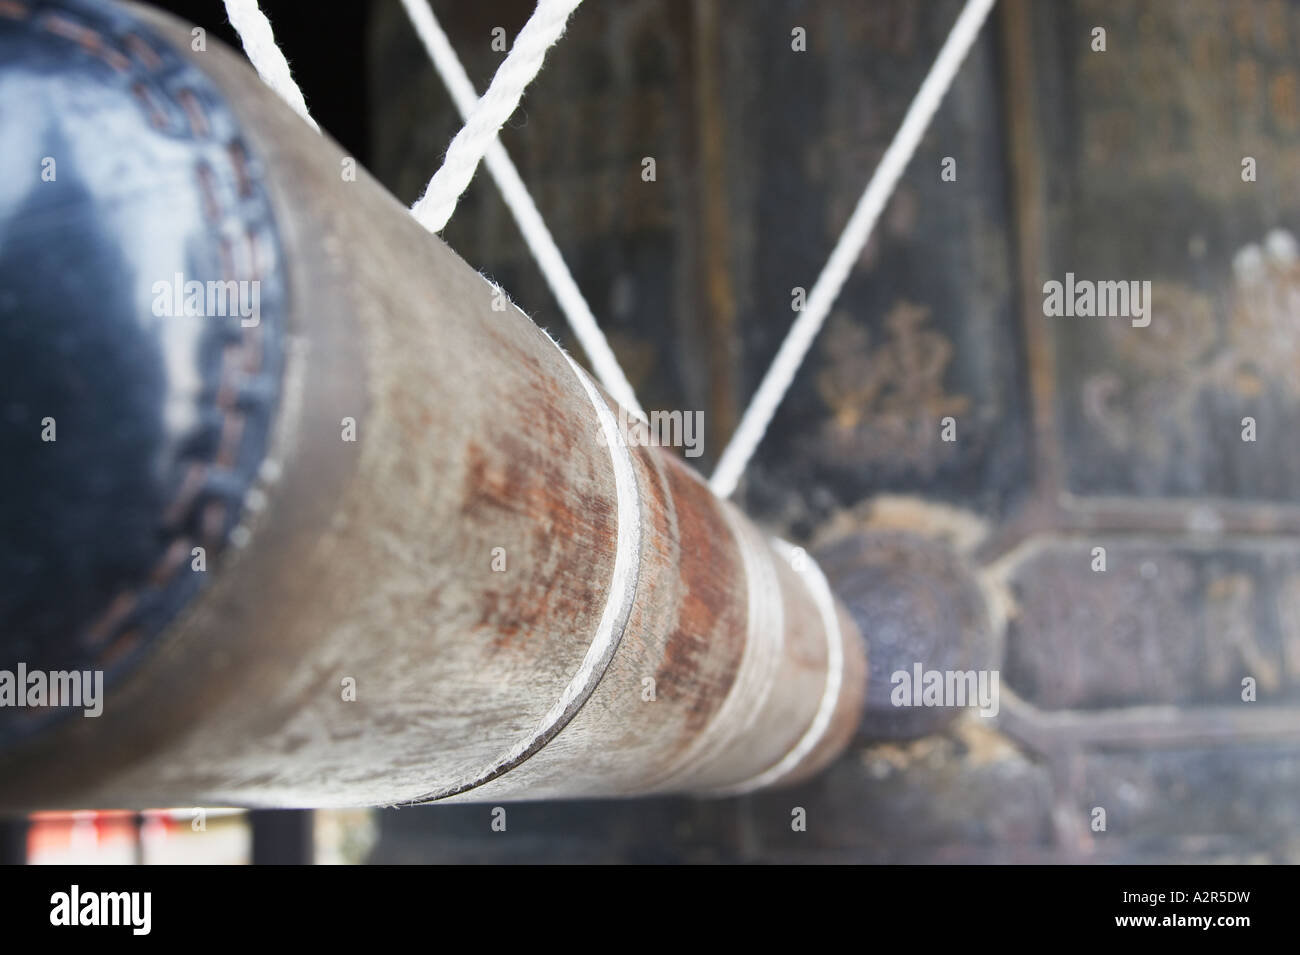 Wooden Pole Used For Striking Ancient Bell Stock Photo